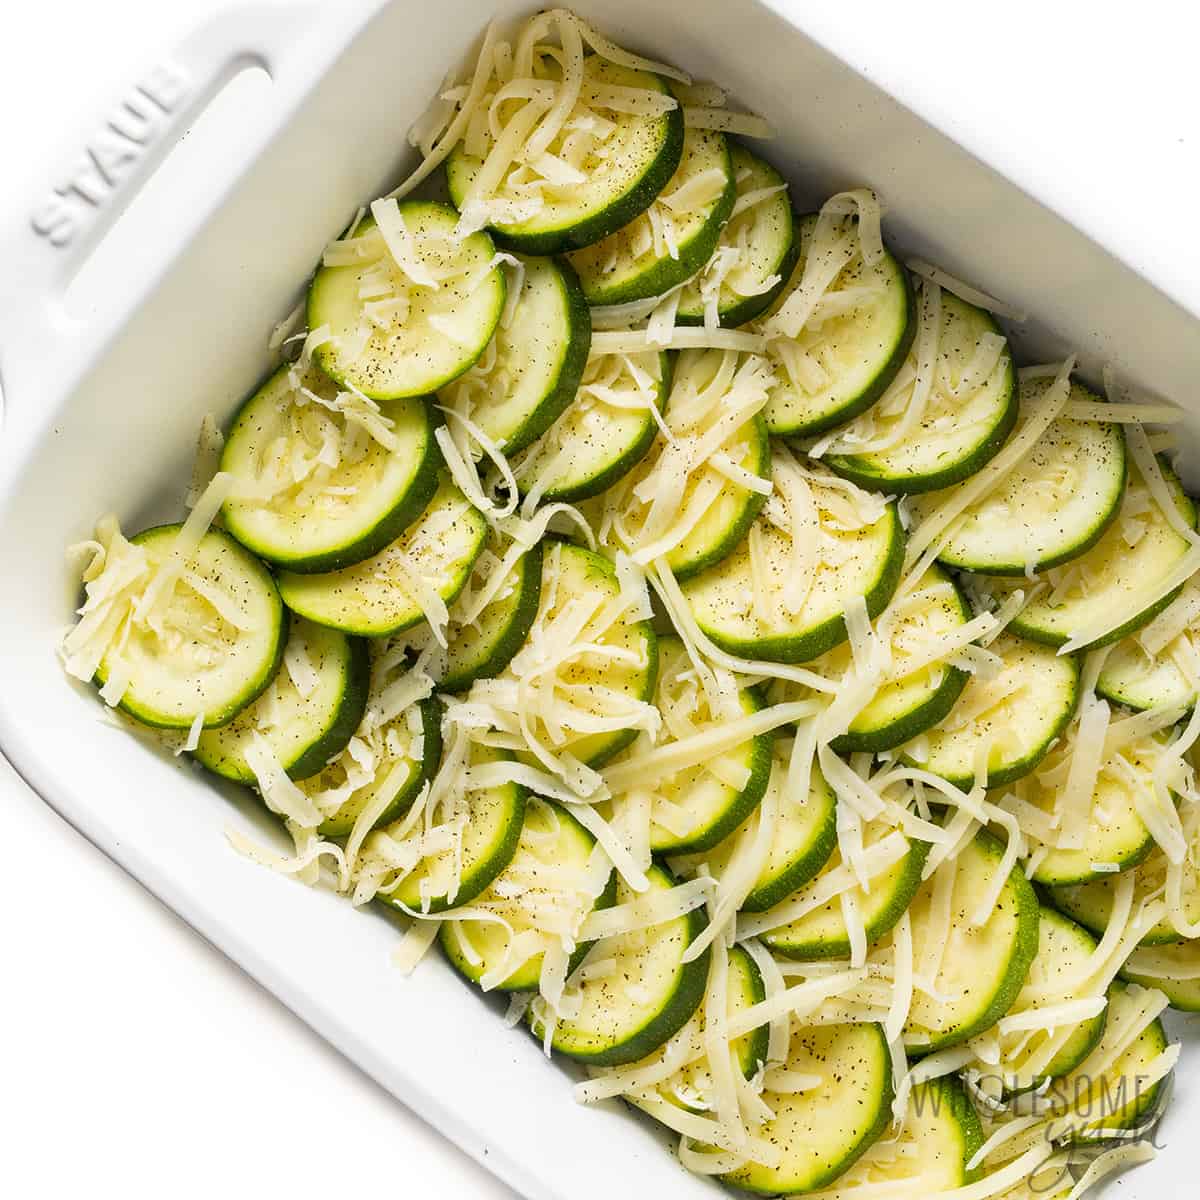 Zucchini layered in casserole dish with shredded cheese.